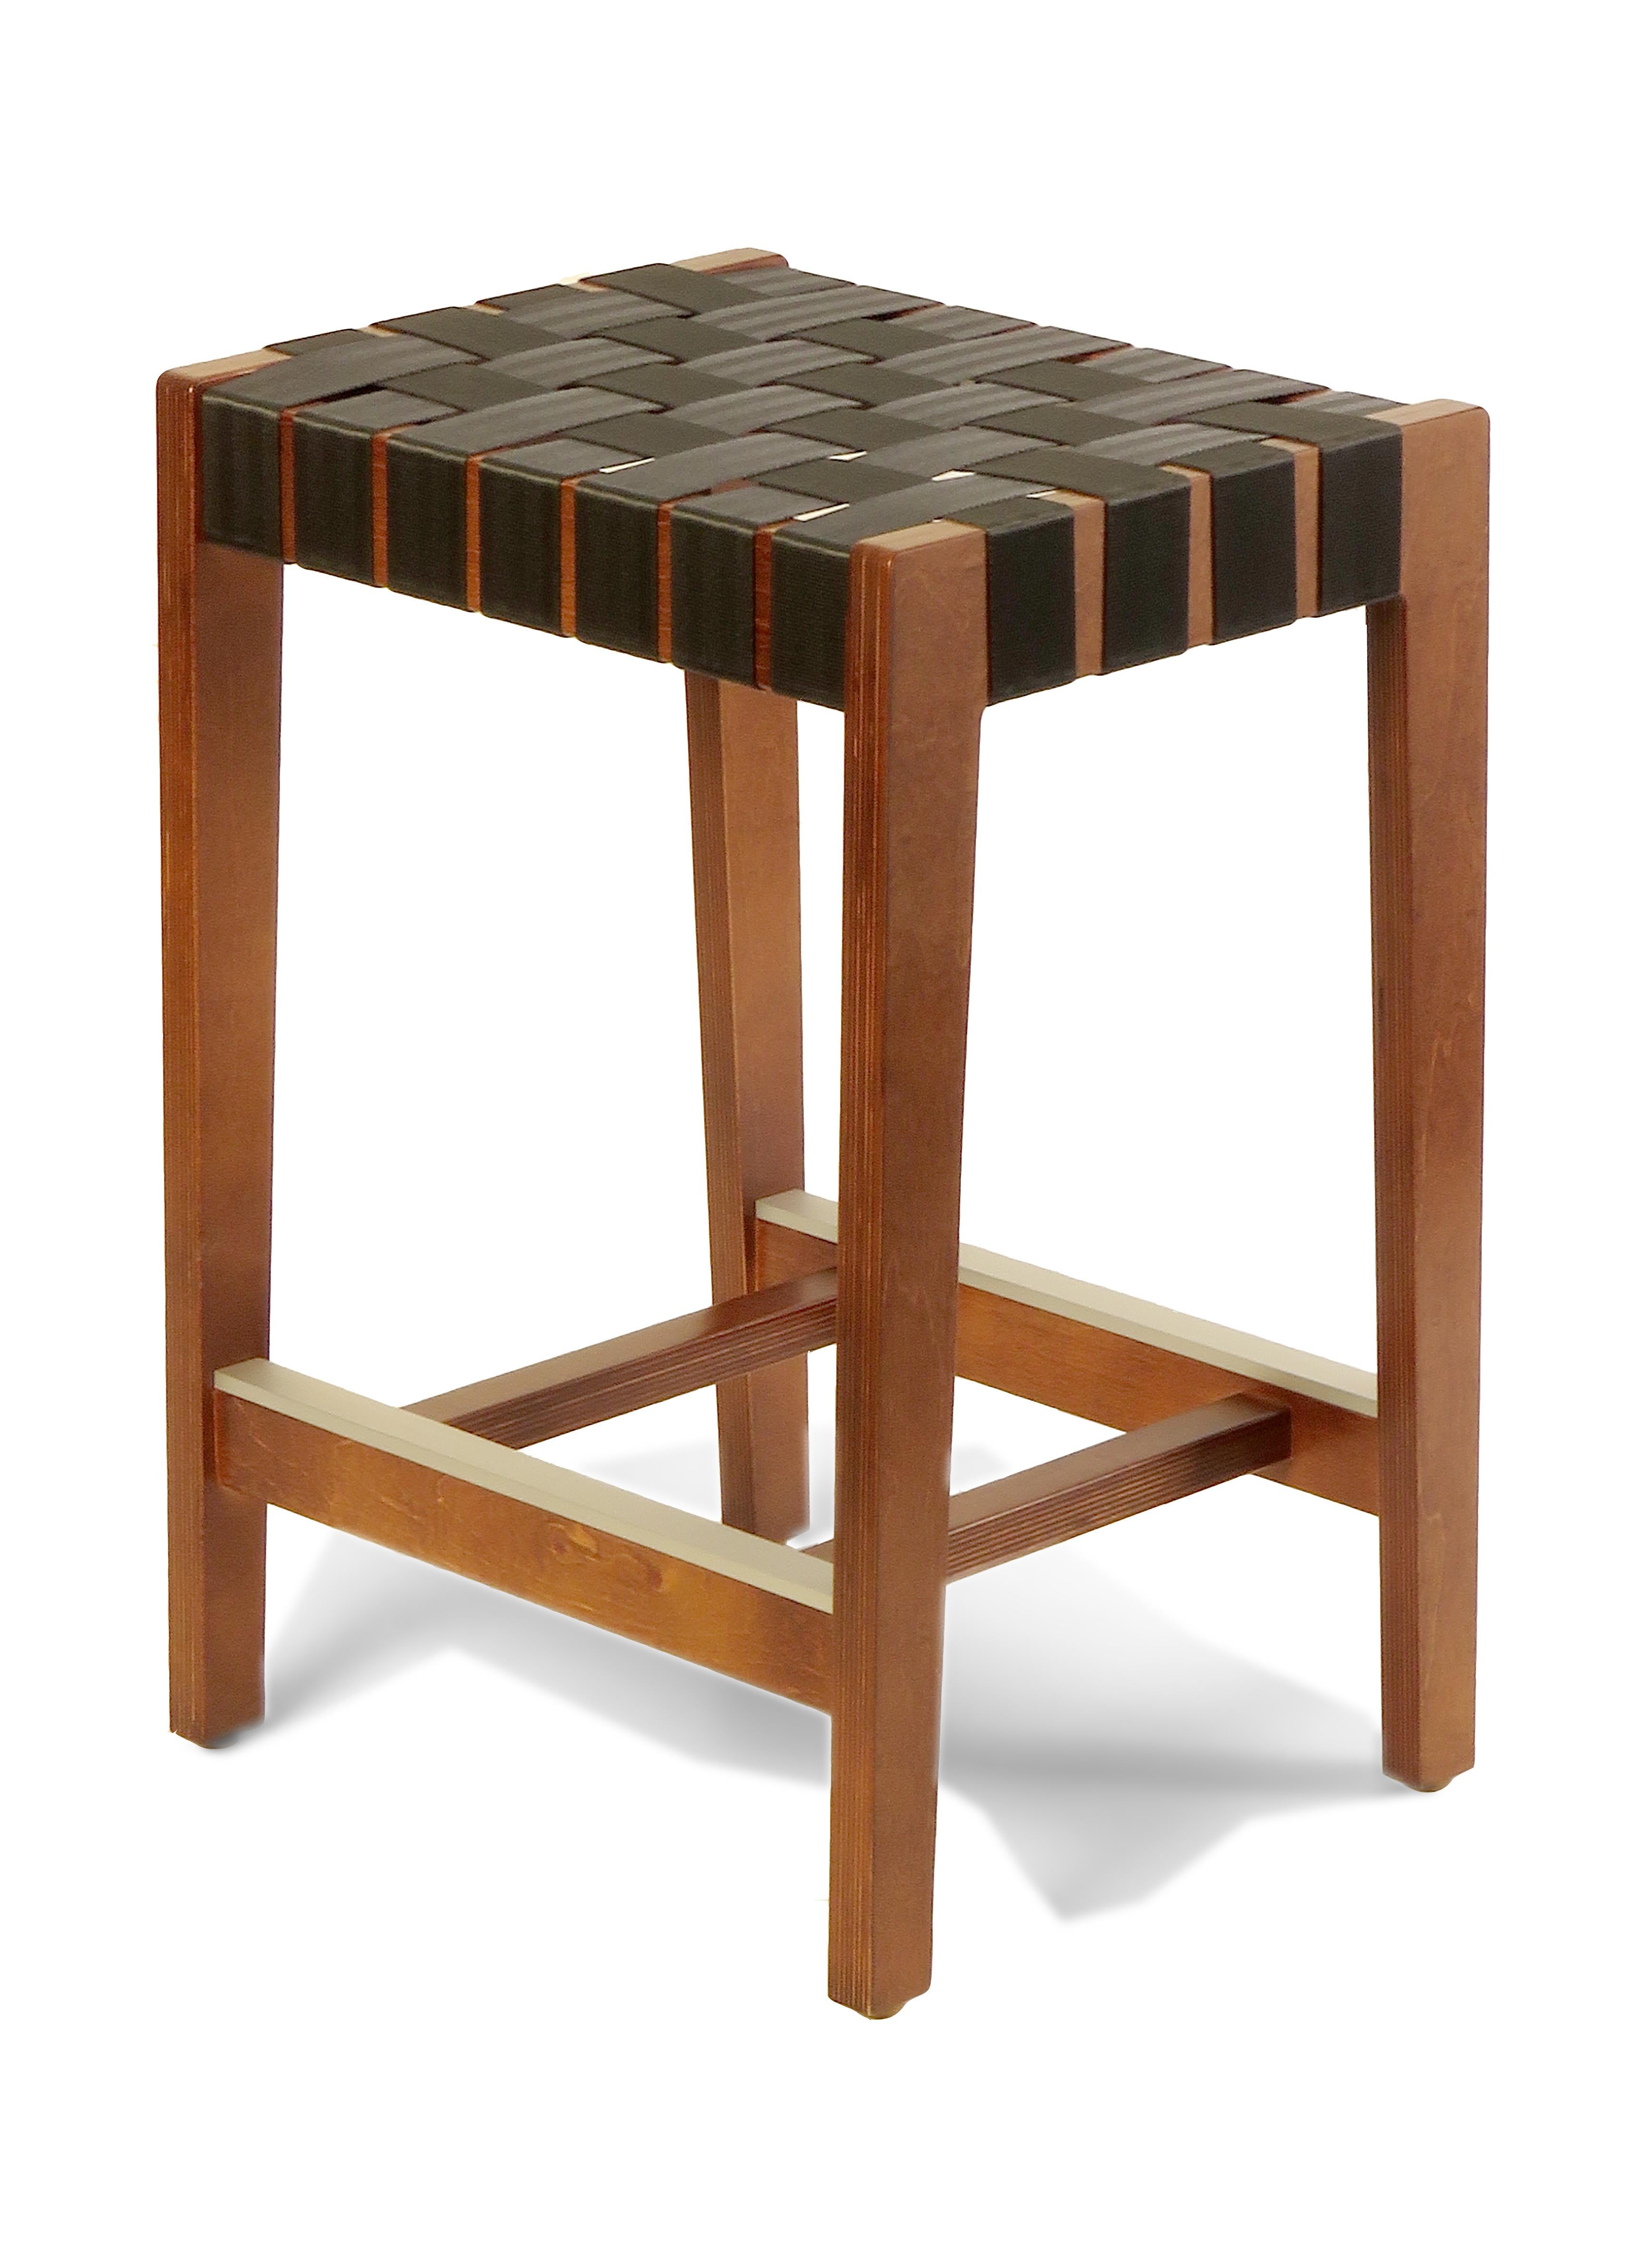 Maple Black Finish Bar Stool with Orange Woven Seat Made in USA by Peter Danko im Angebot 1